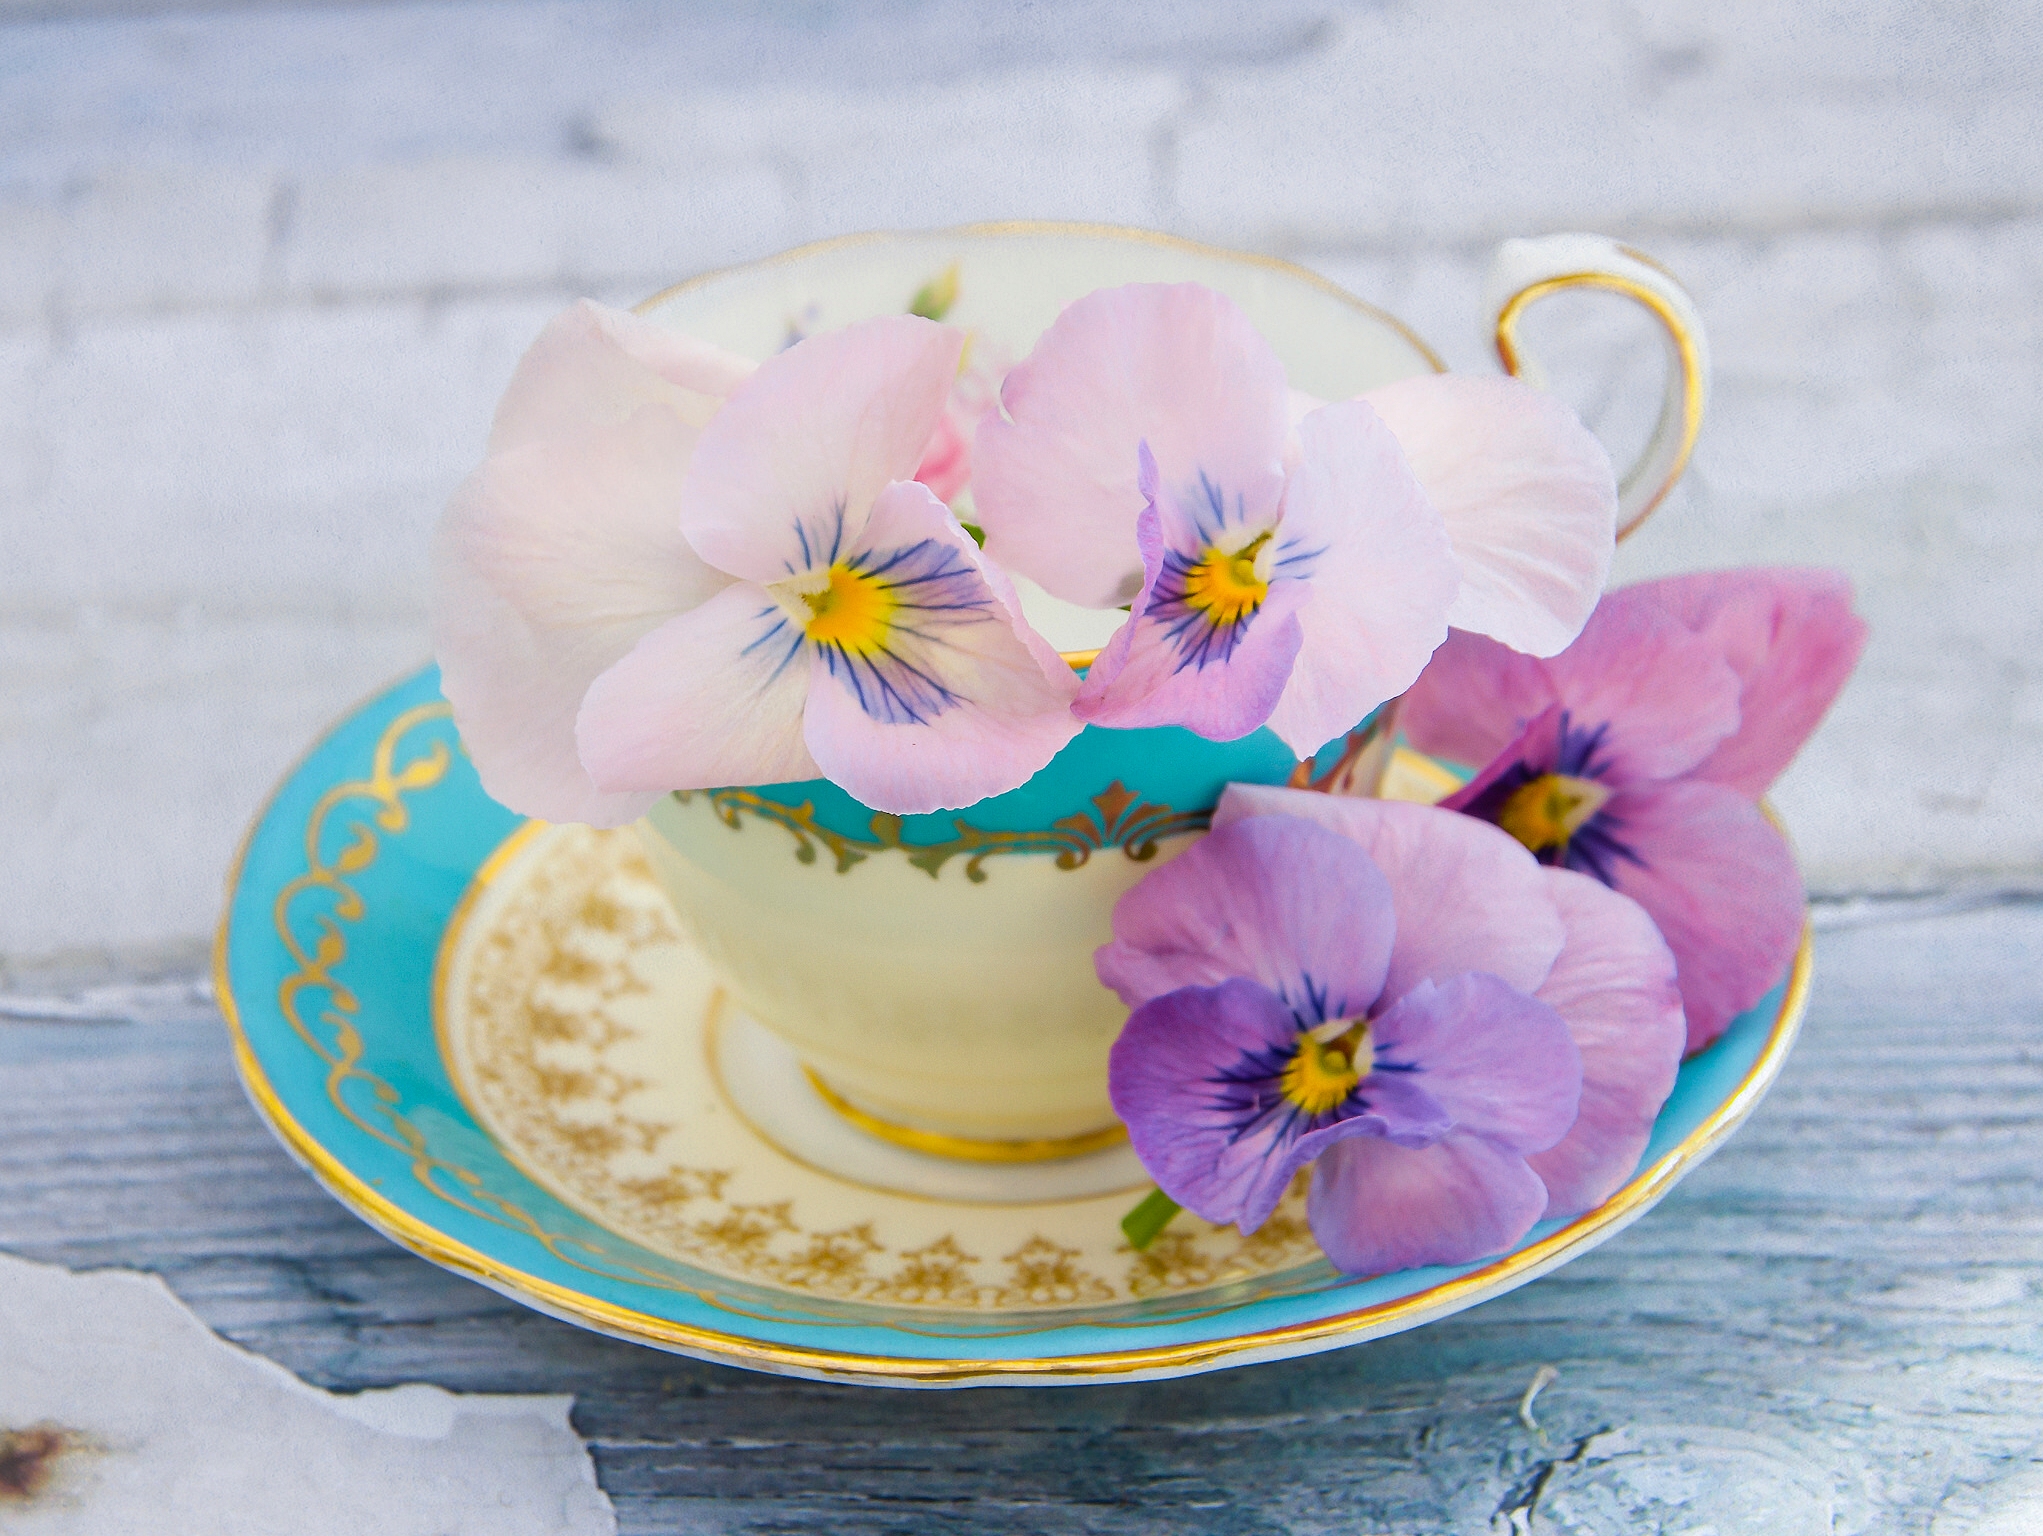 photography, still life, cup, pansy, purple flower, saucer